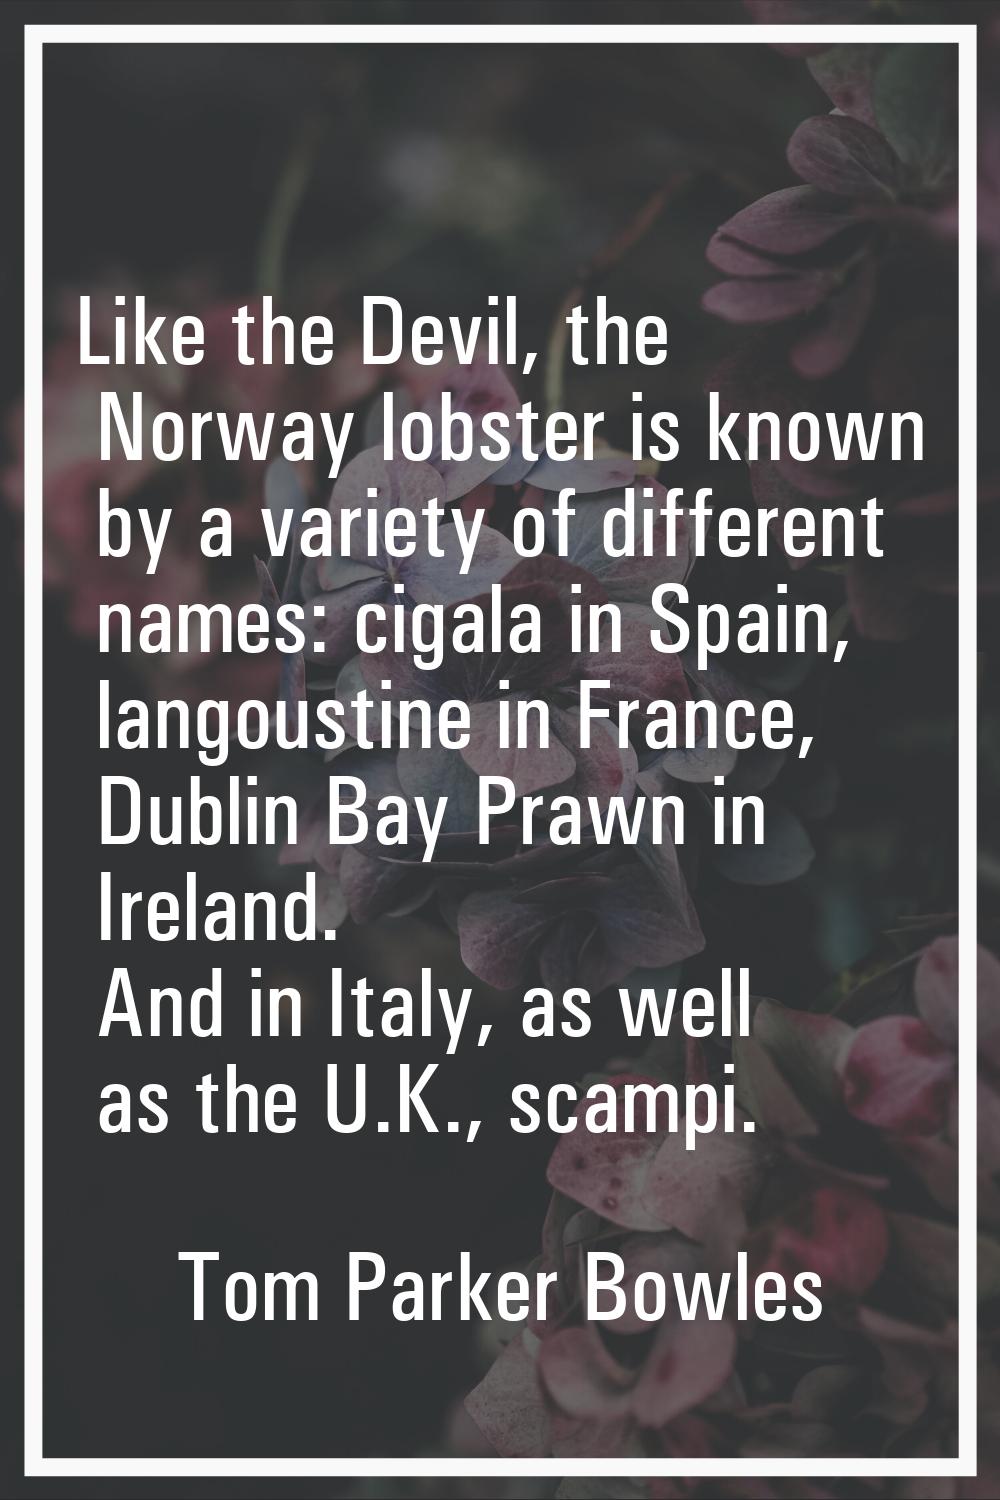 Like the Devil, the Norway lobster is known by a variety of different names: cigala in Spain, lango